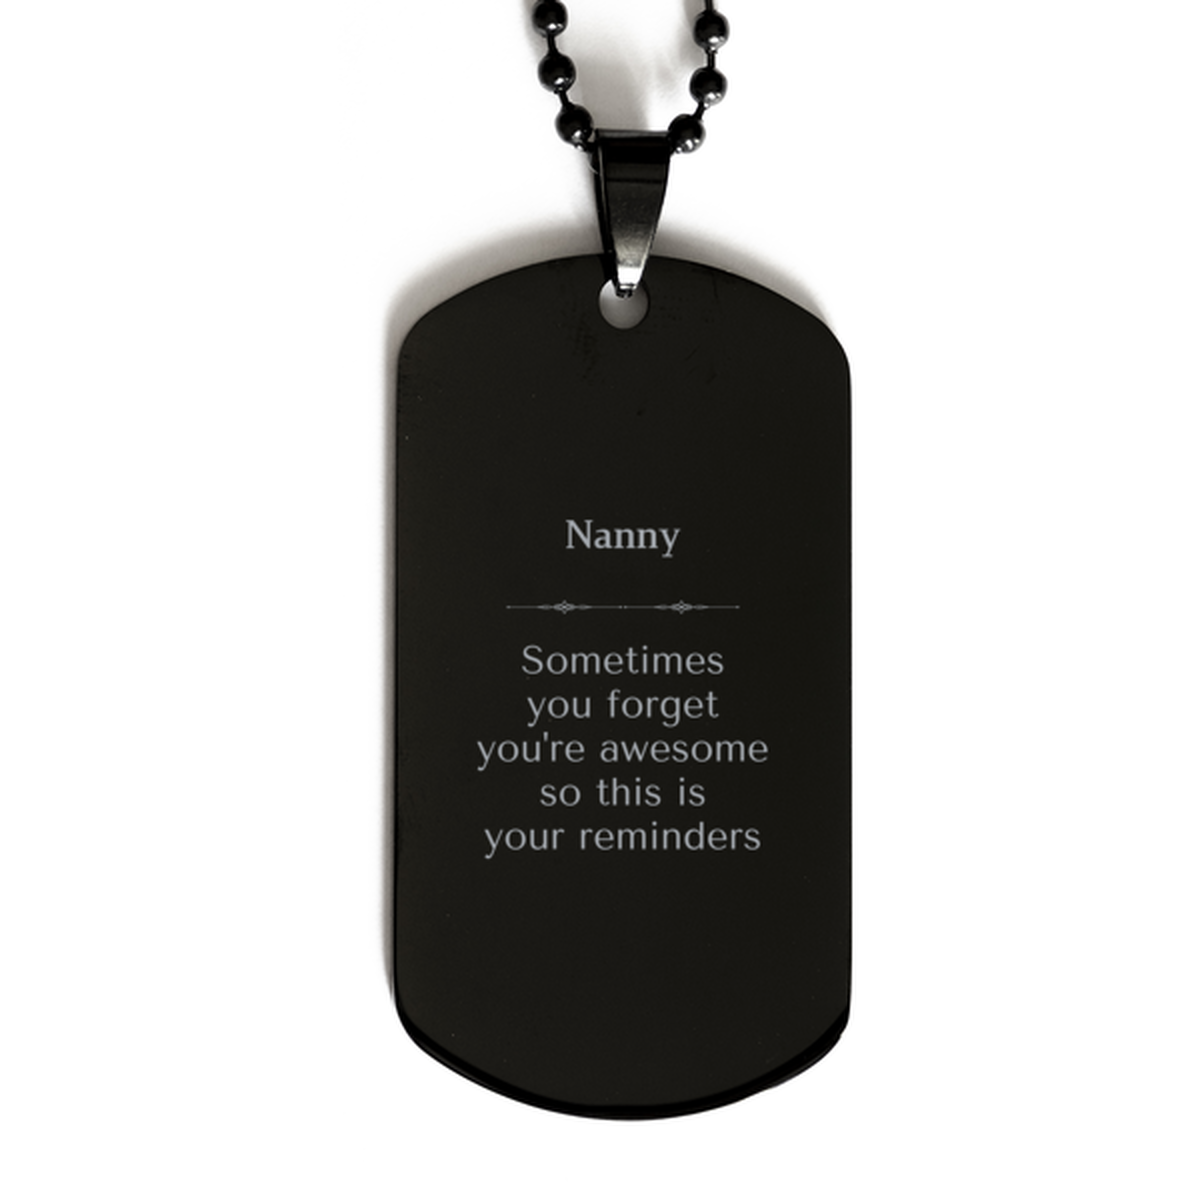 Sentimental Nanny Black Dog Tag, Nanny Sometimes you forget you're awesome so this is your reminders, Graduation Christmas Birthday Gifts for Nanny, Men, Women, Coworkers